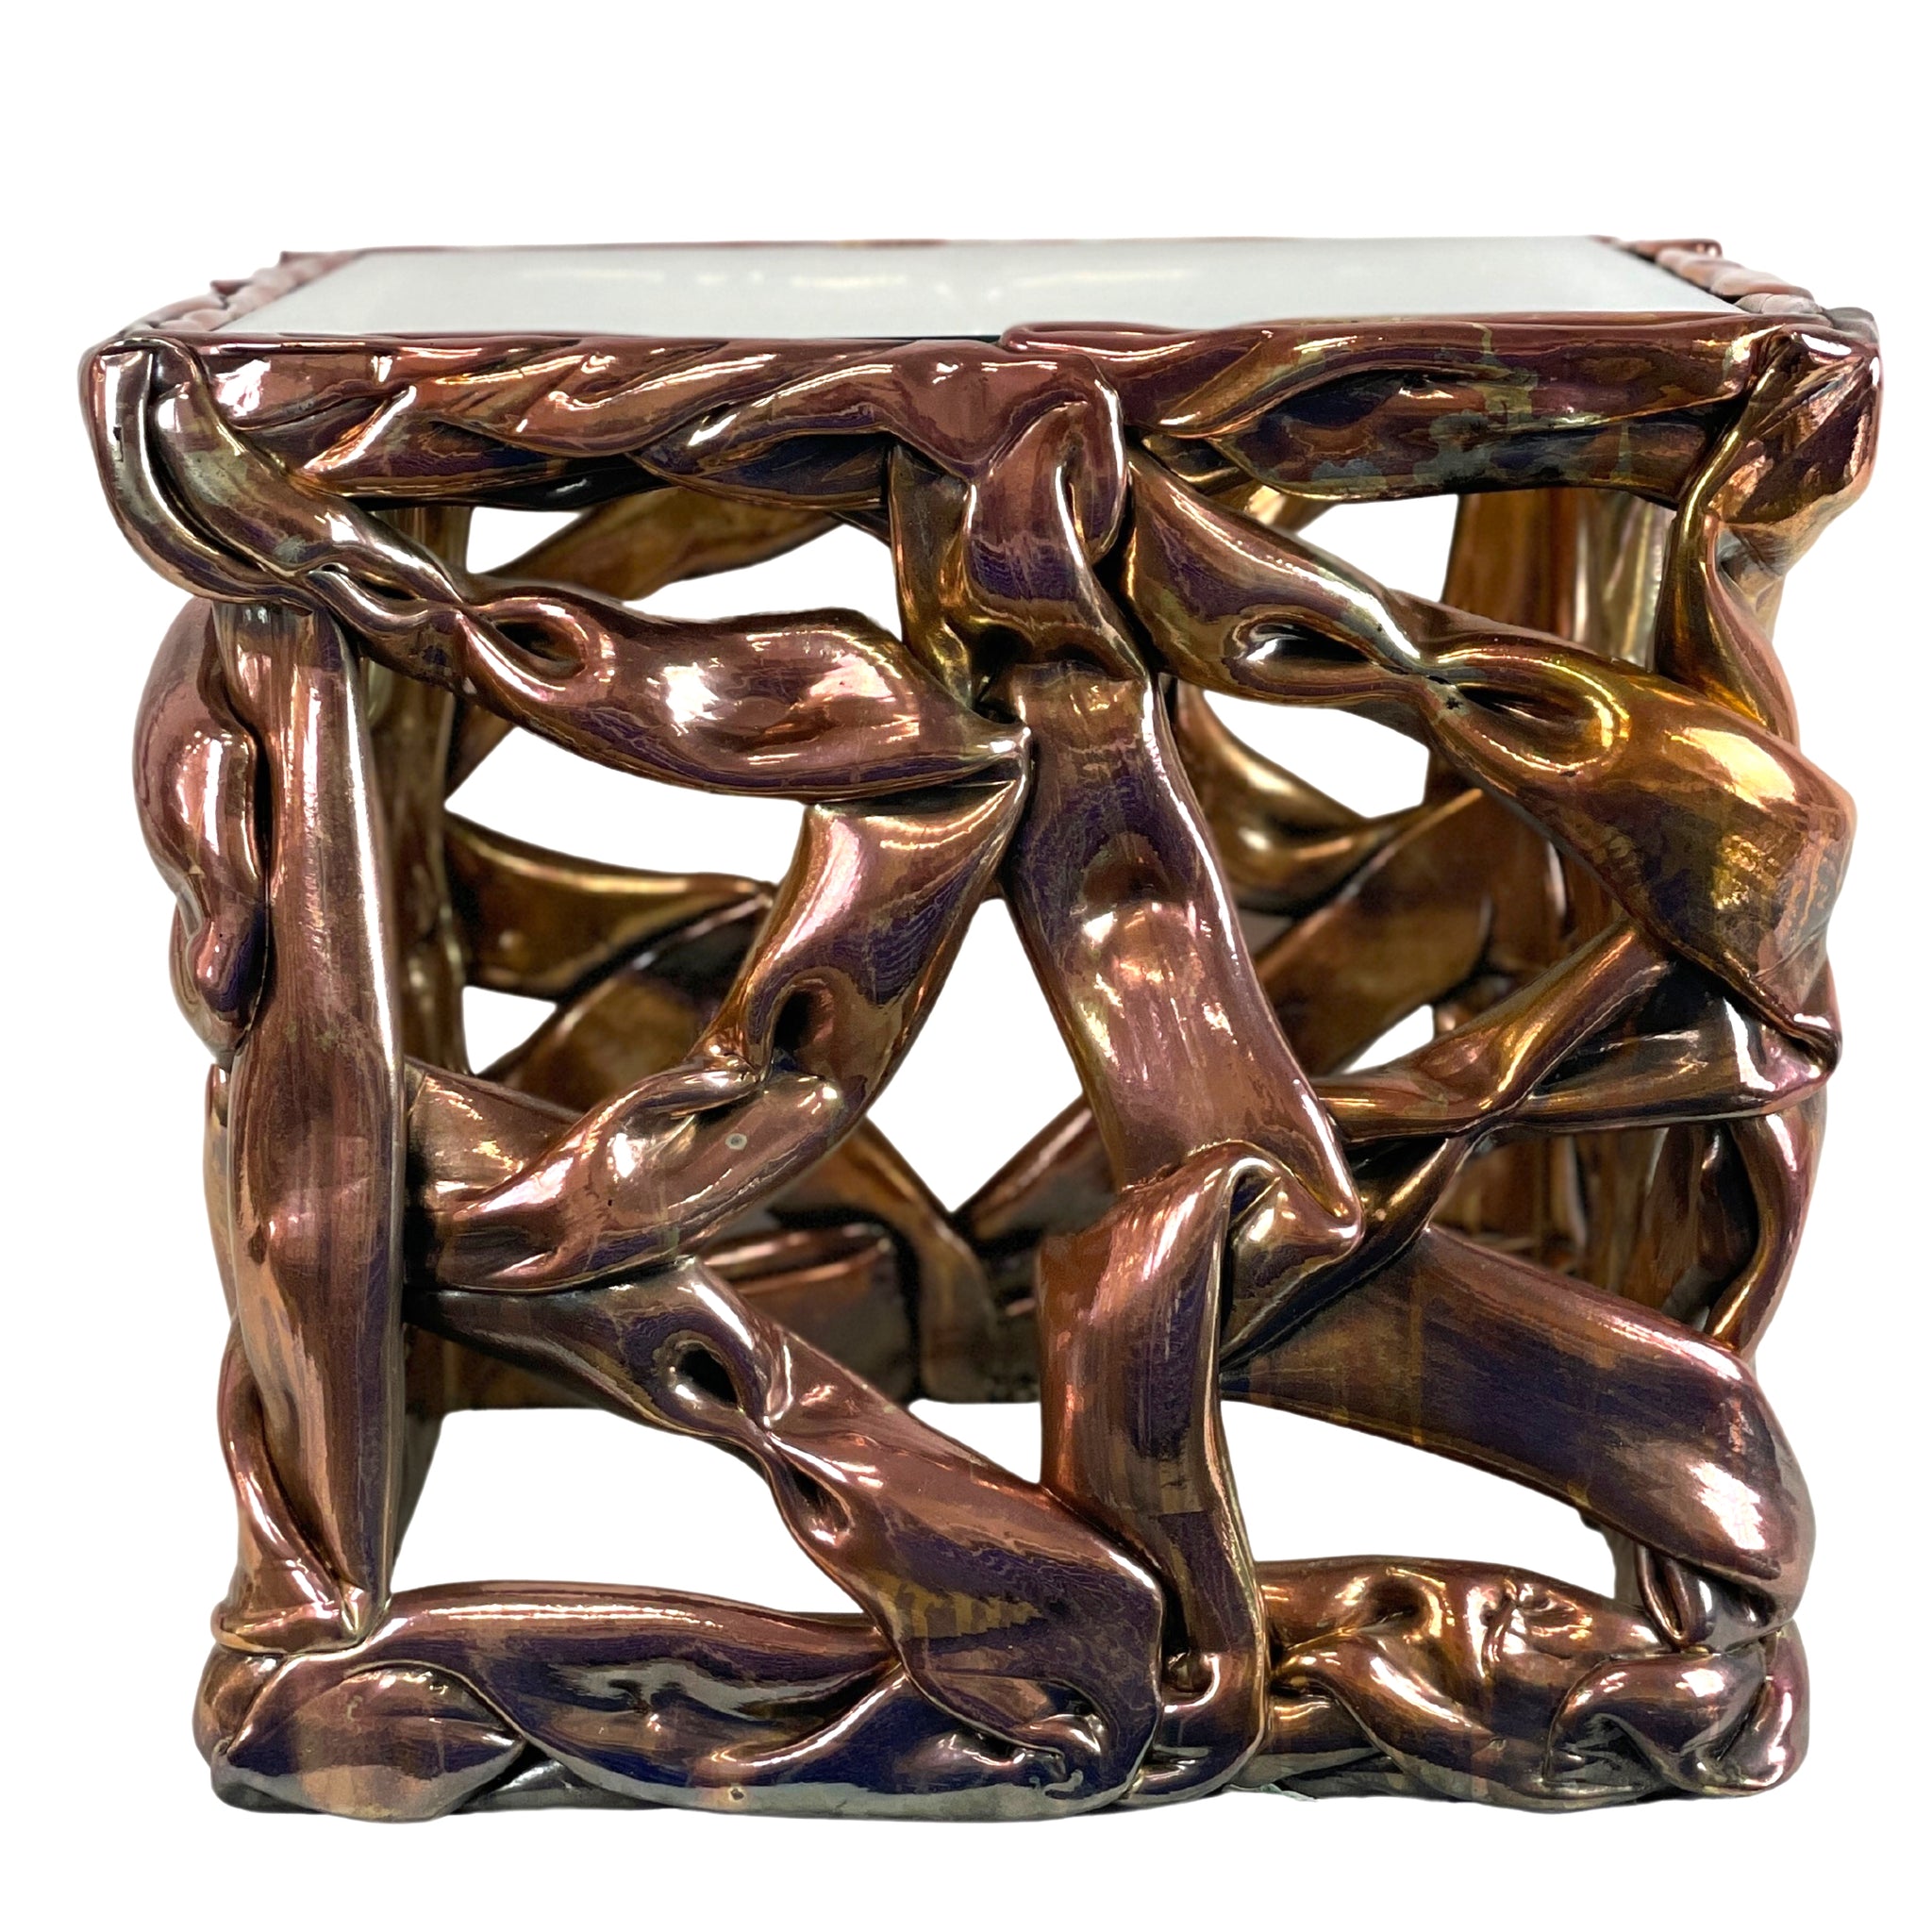 Tony Duqette [Attributed To] Gilded Resin “Ribbon” Table, ca. 1980s